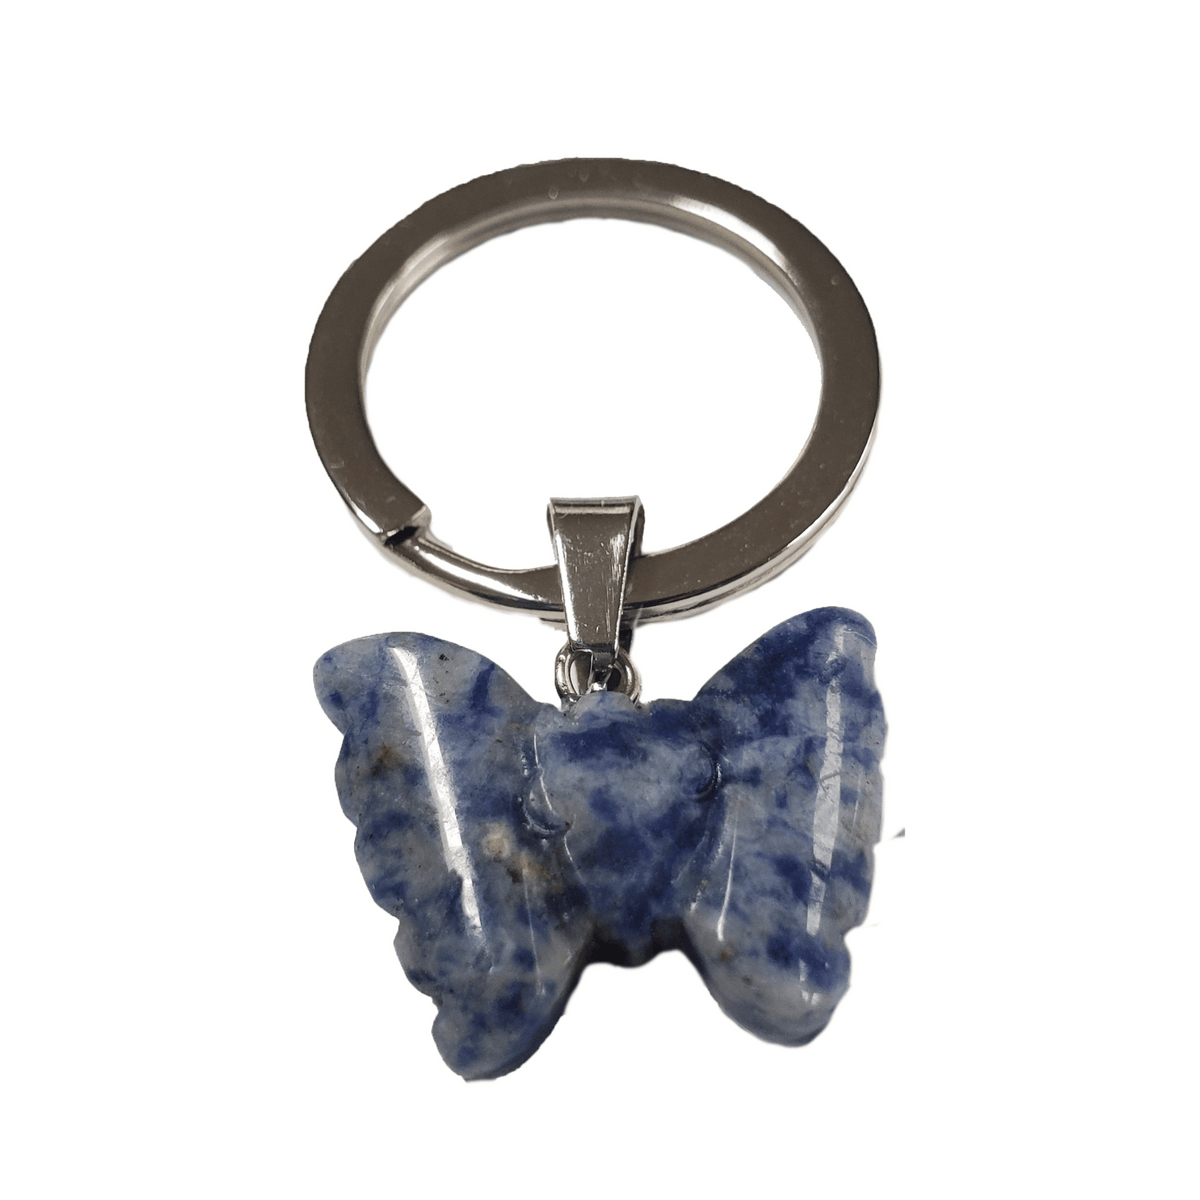 Butterfly Blessings Keepsake Candle - Pet Memorial Candle - Sodalite Butterfly Keychain